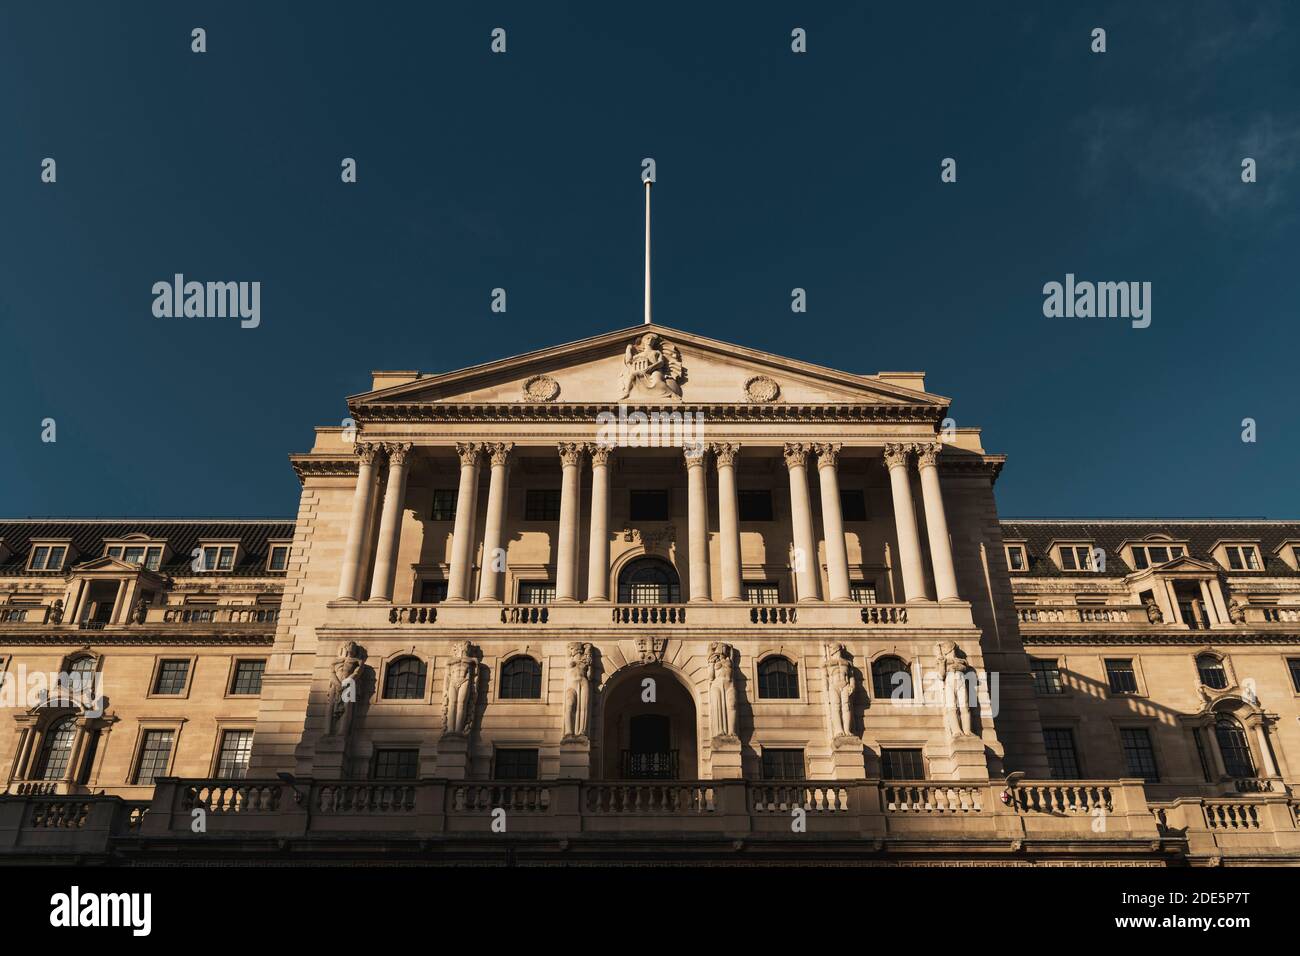 Bank of England during Coronavirus Covid-19 lockdown in The City, showing impact of global pandemic in London, England, UK, Europe Stock Photo